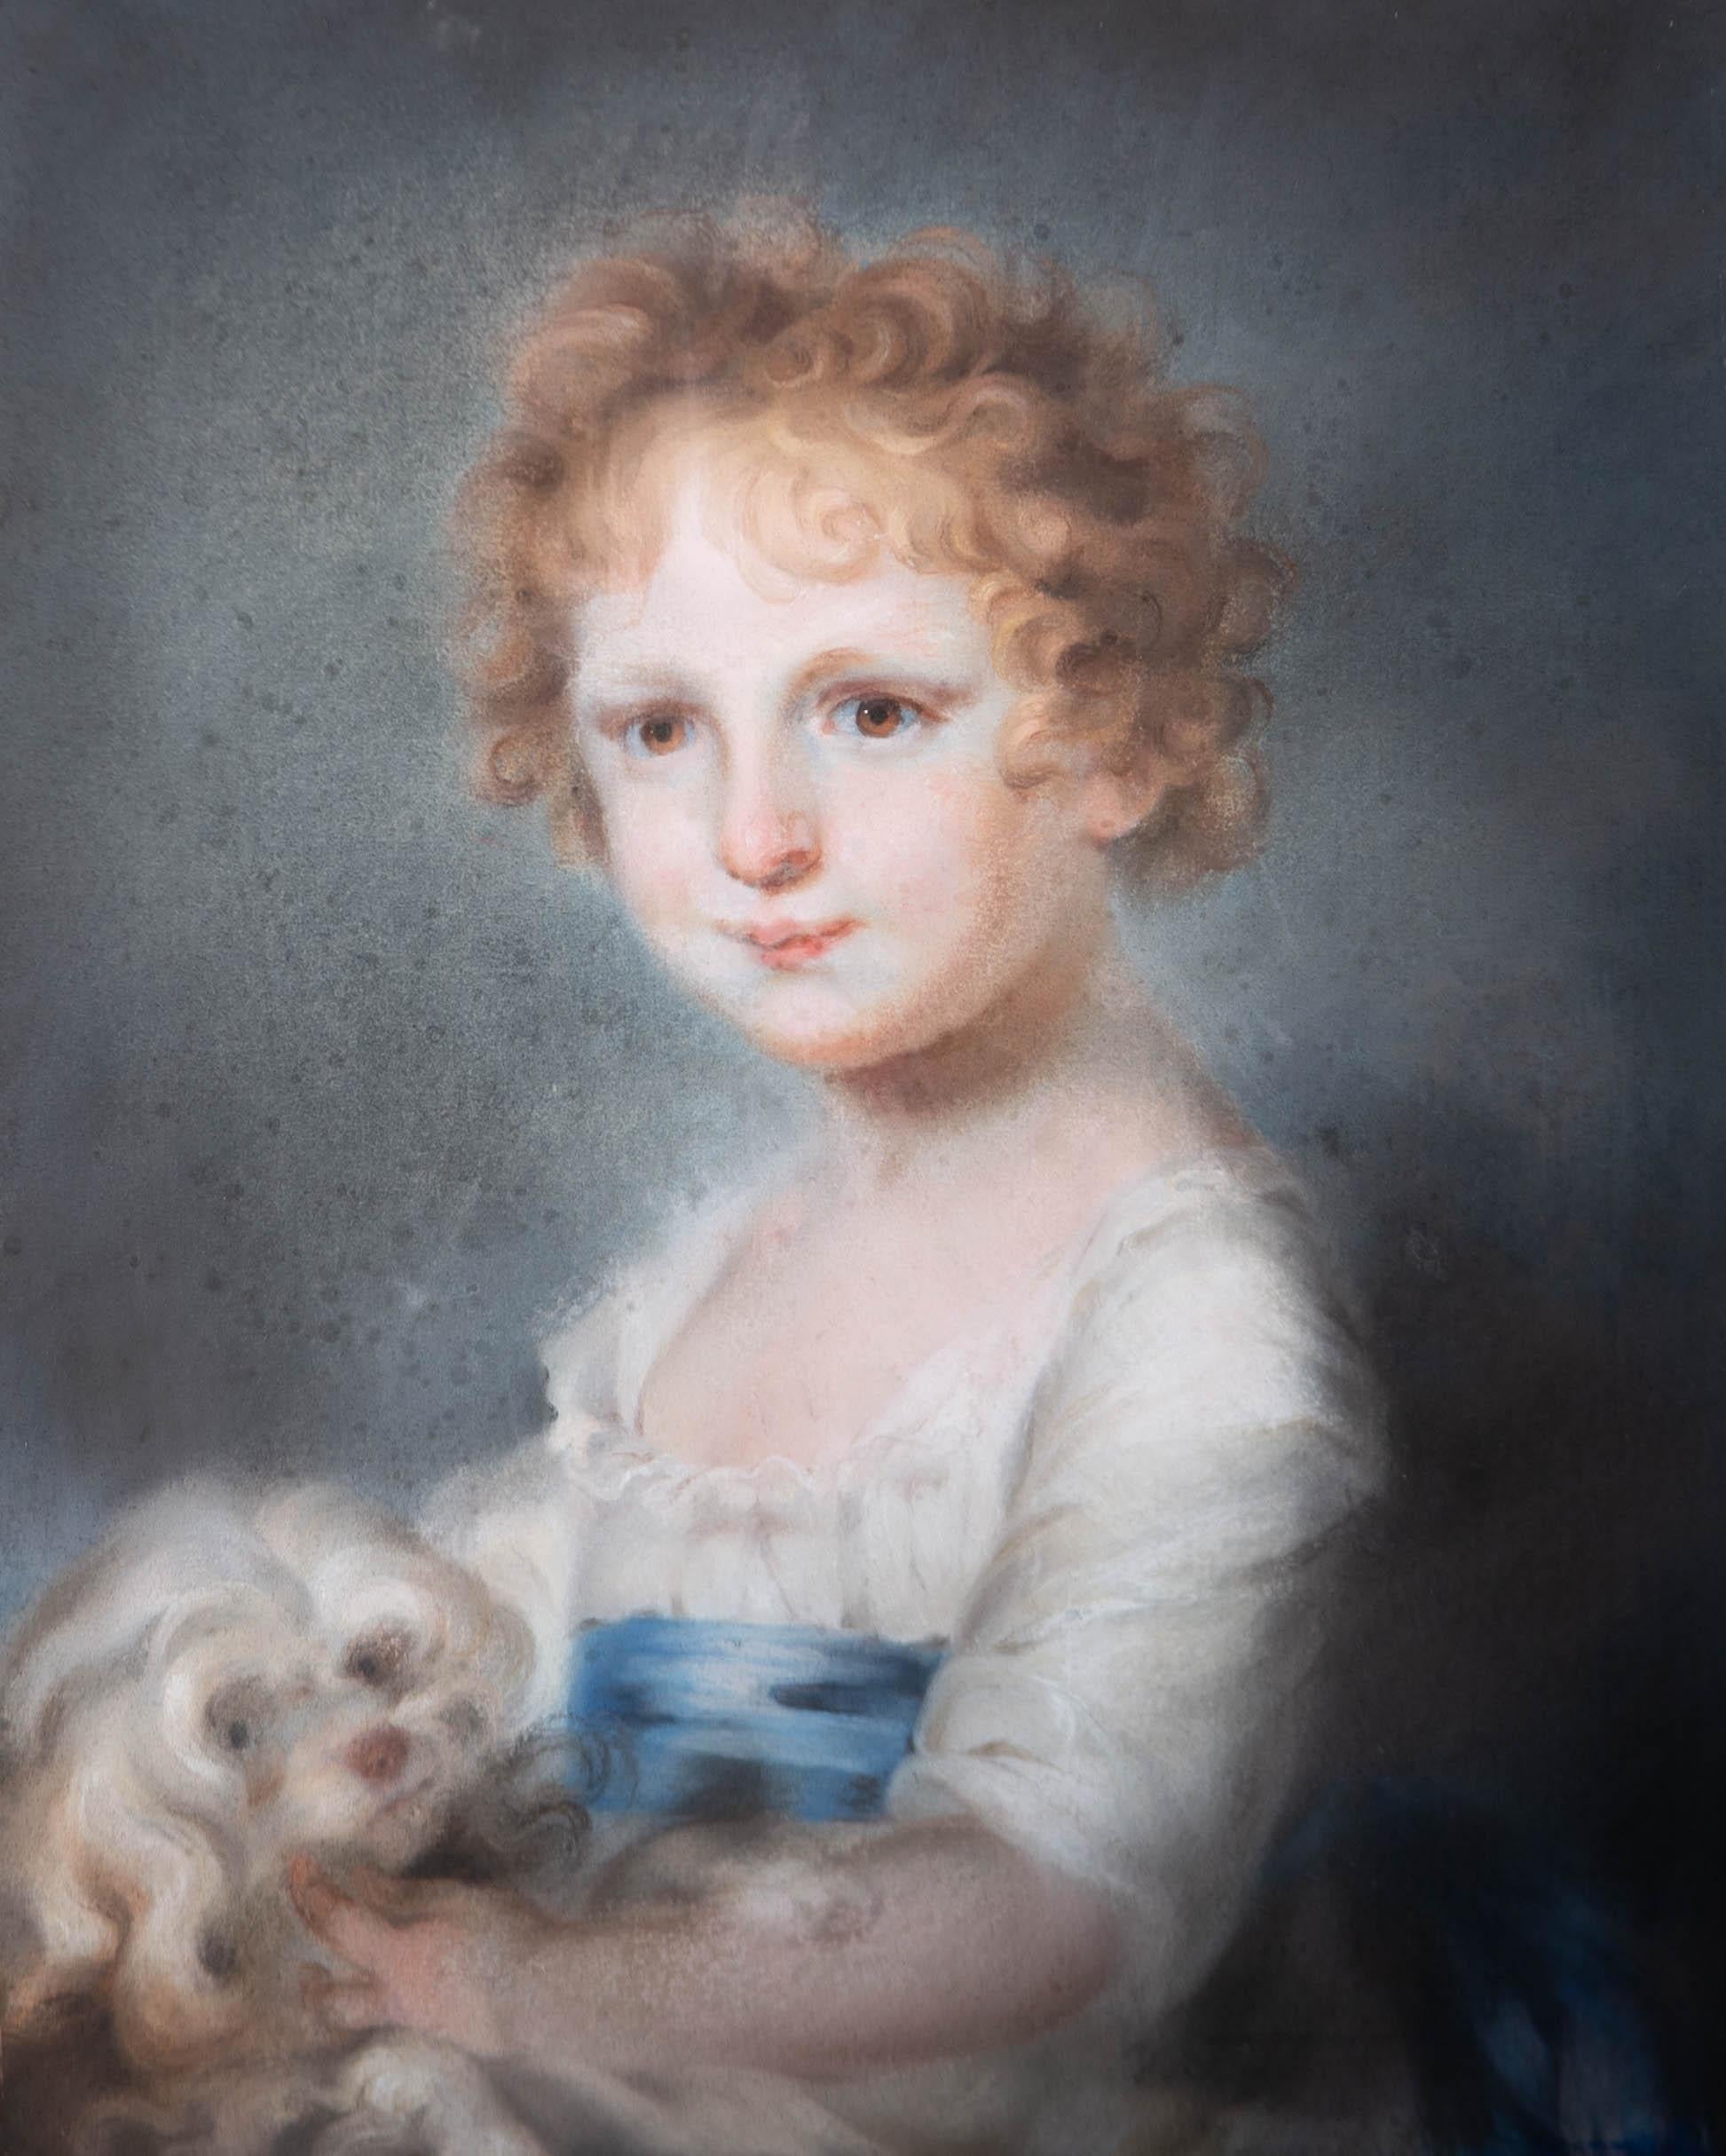 A truly masterful portrait in pastel. A young boy in traditional Georgian attire with charmingly curled auburn hair. Russell was most renowned for his pastel portraiture and had a wonderful affinity with the medium. This portrait shows a skilled and